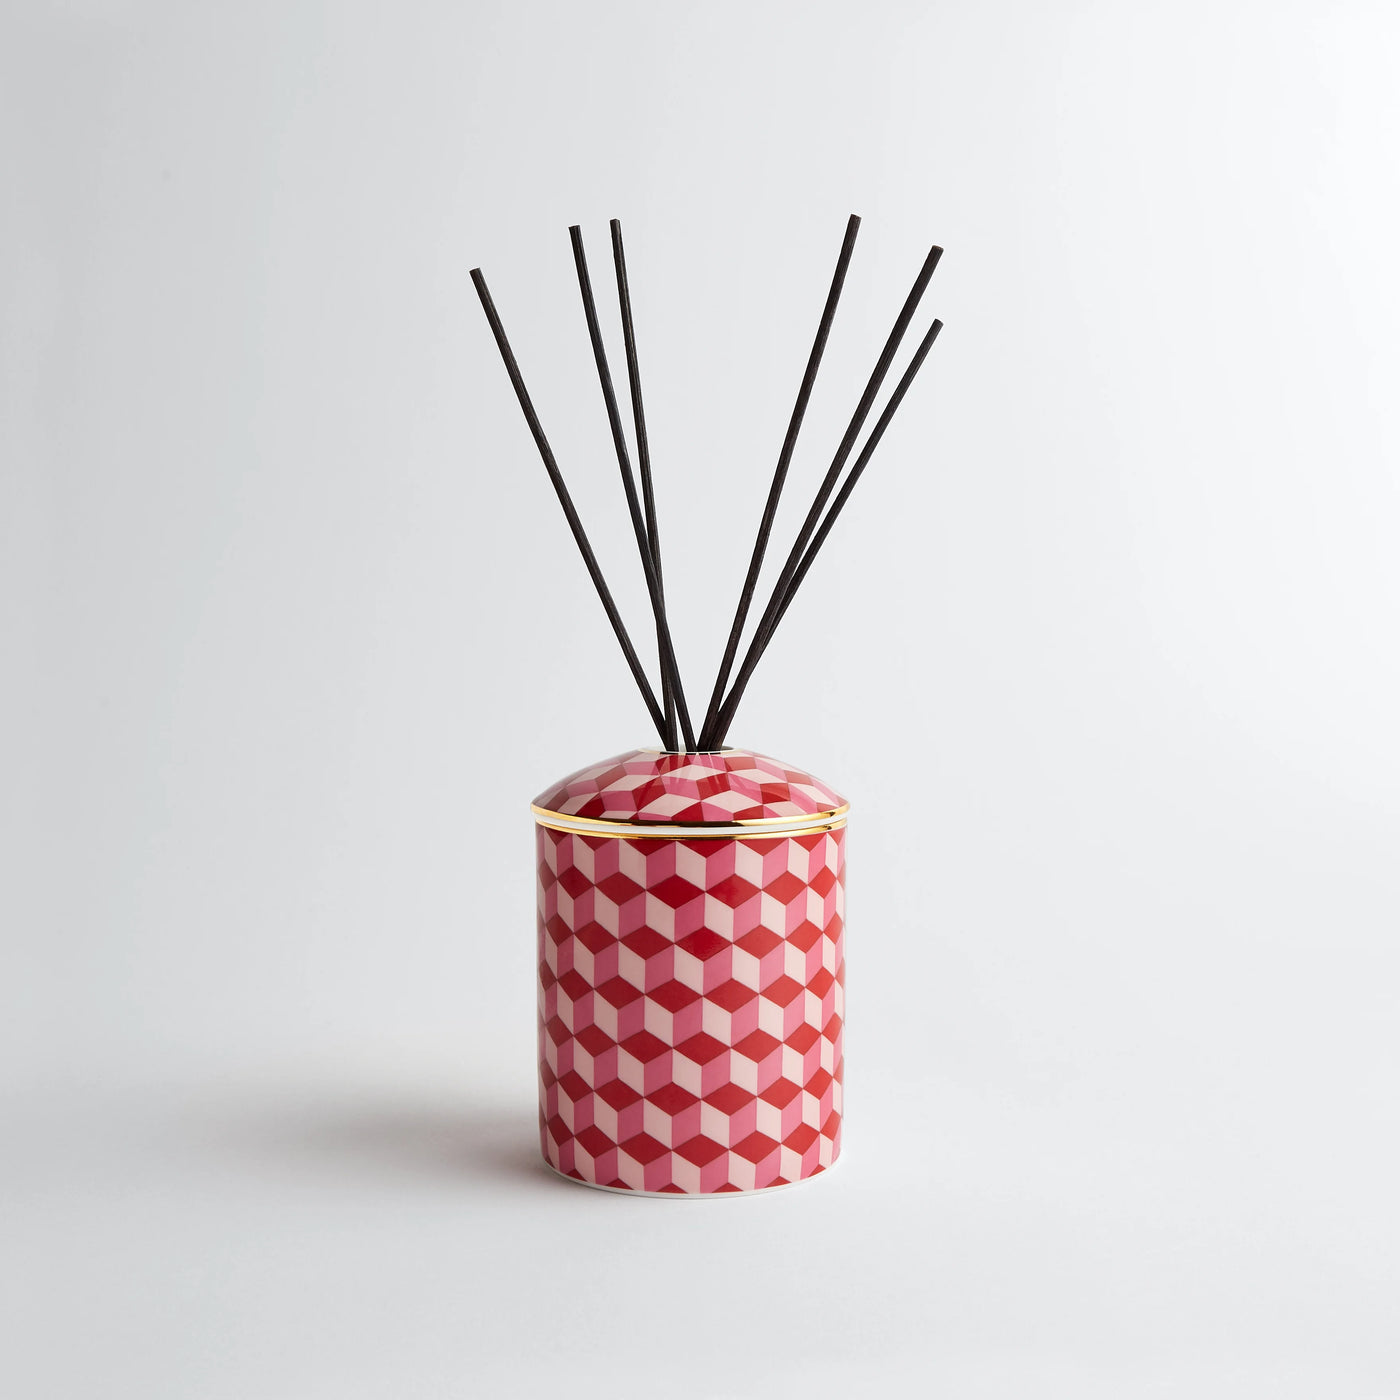 Maison Splendid fine bone china diffuser in red/pink geometric print with number eight fragrance floral scent